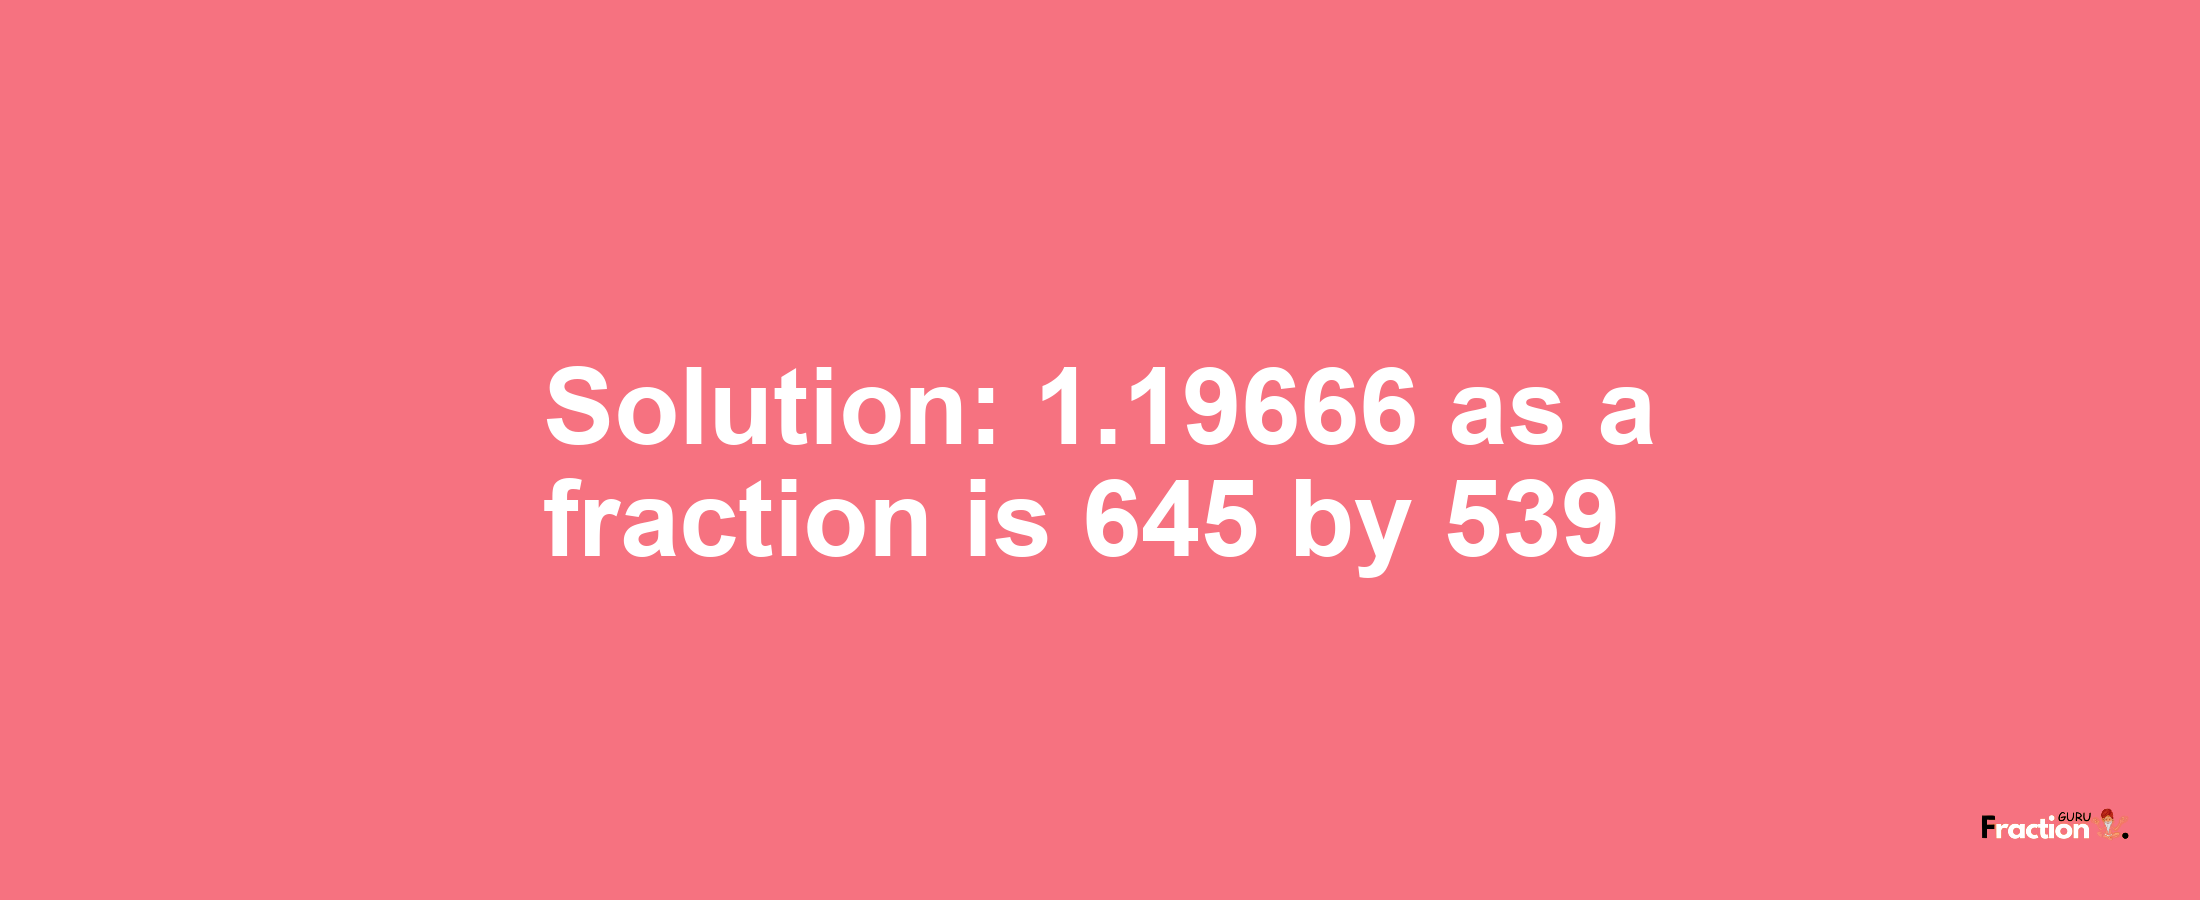 Solution:1.19666 as a fraction is 645/539